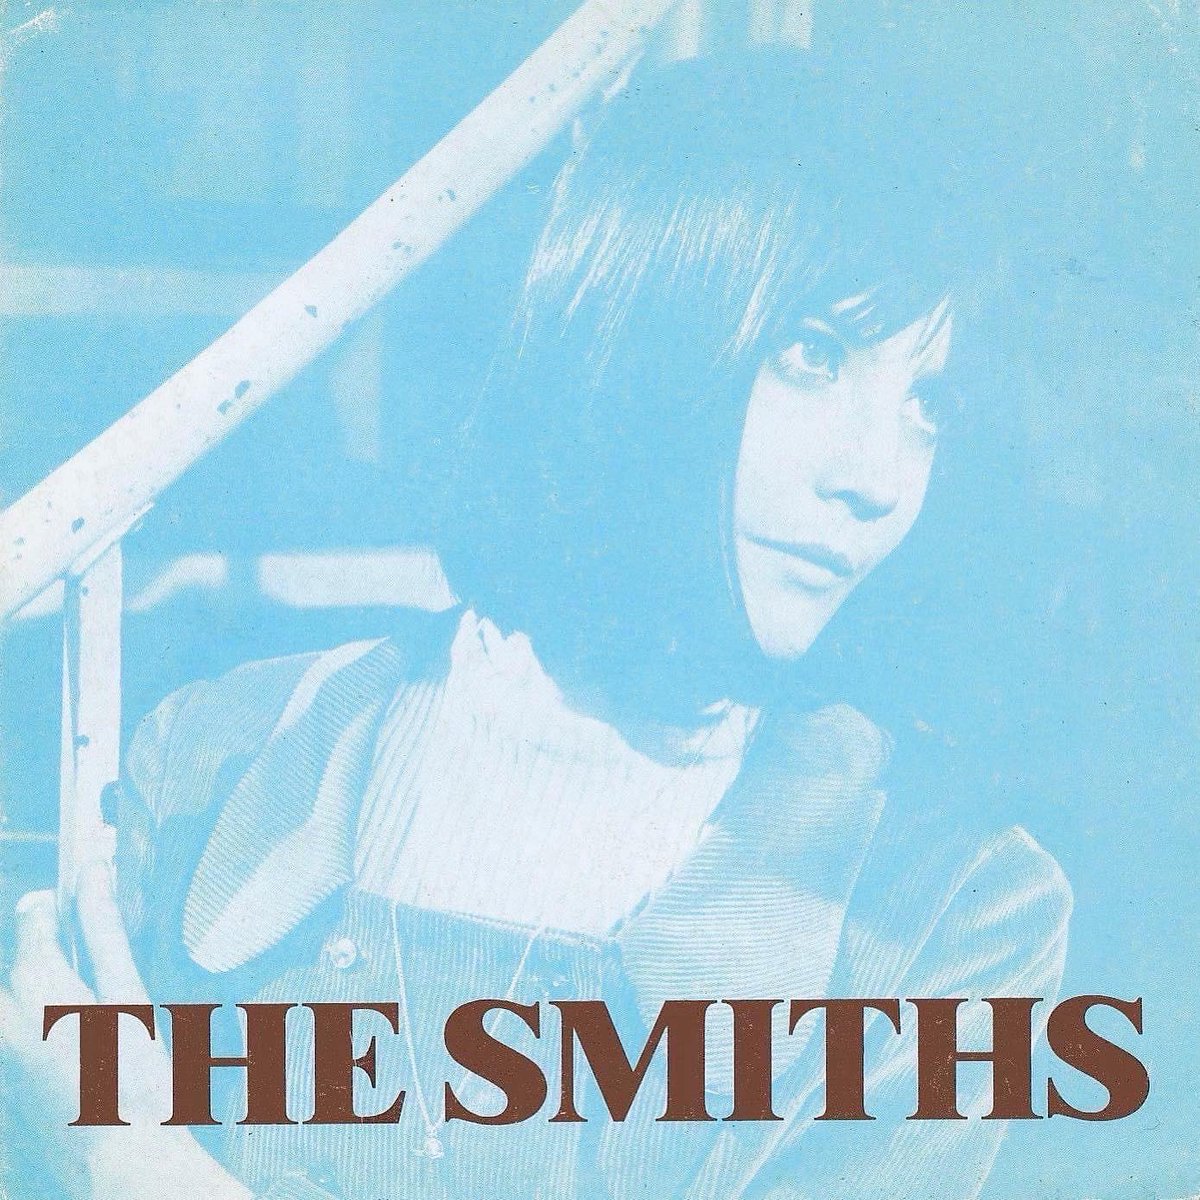 Happy anniversary to The Smiths single, “There Is A Light That Never Goes Out”. Released in France this month in 1987 (and later released in the U.K. in October 1992). #thesmiths #morrissey #johnnymarr #thereisalightthatnevergoesout #thequeenisdead